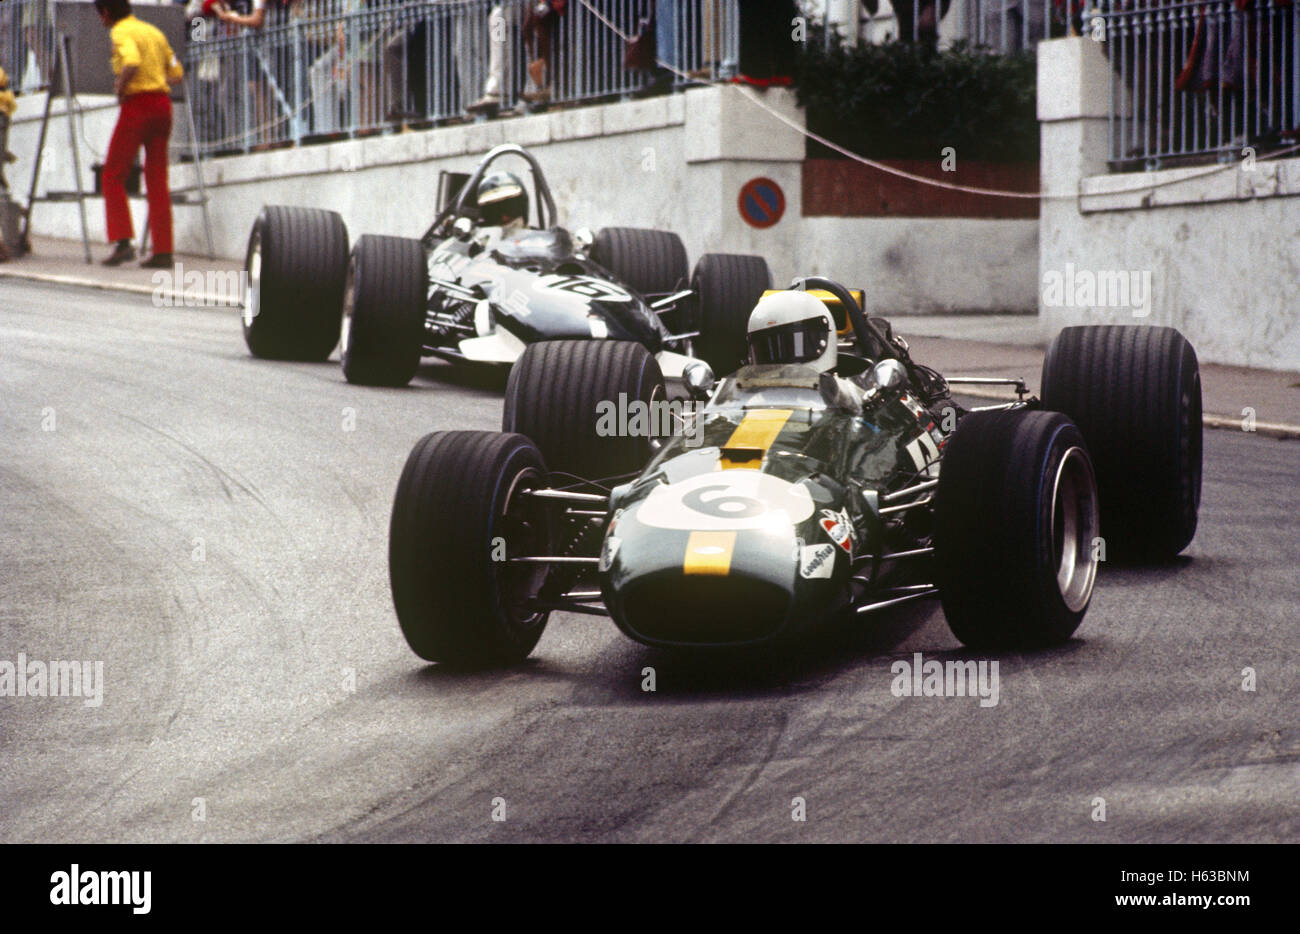 6 Jacky Ickx in his Brabham Cosworth BT26A and 16 Piers Courage in his Brabham Cosworth BT26A Monaco GP Monte Carlo 18 May 1969 Stock Photo